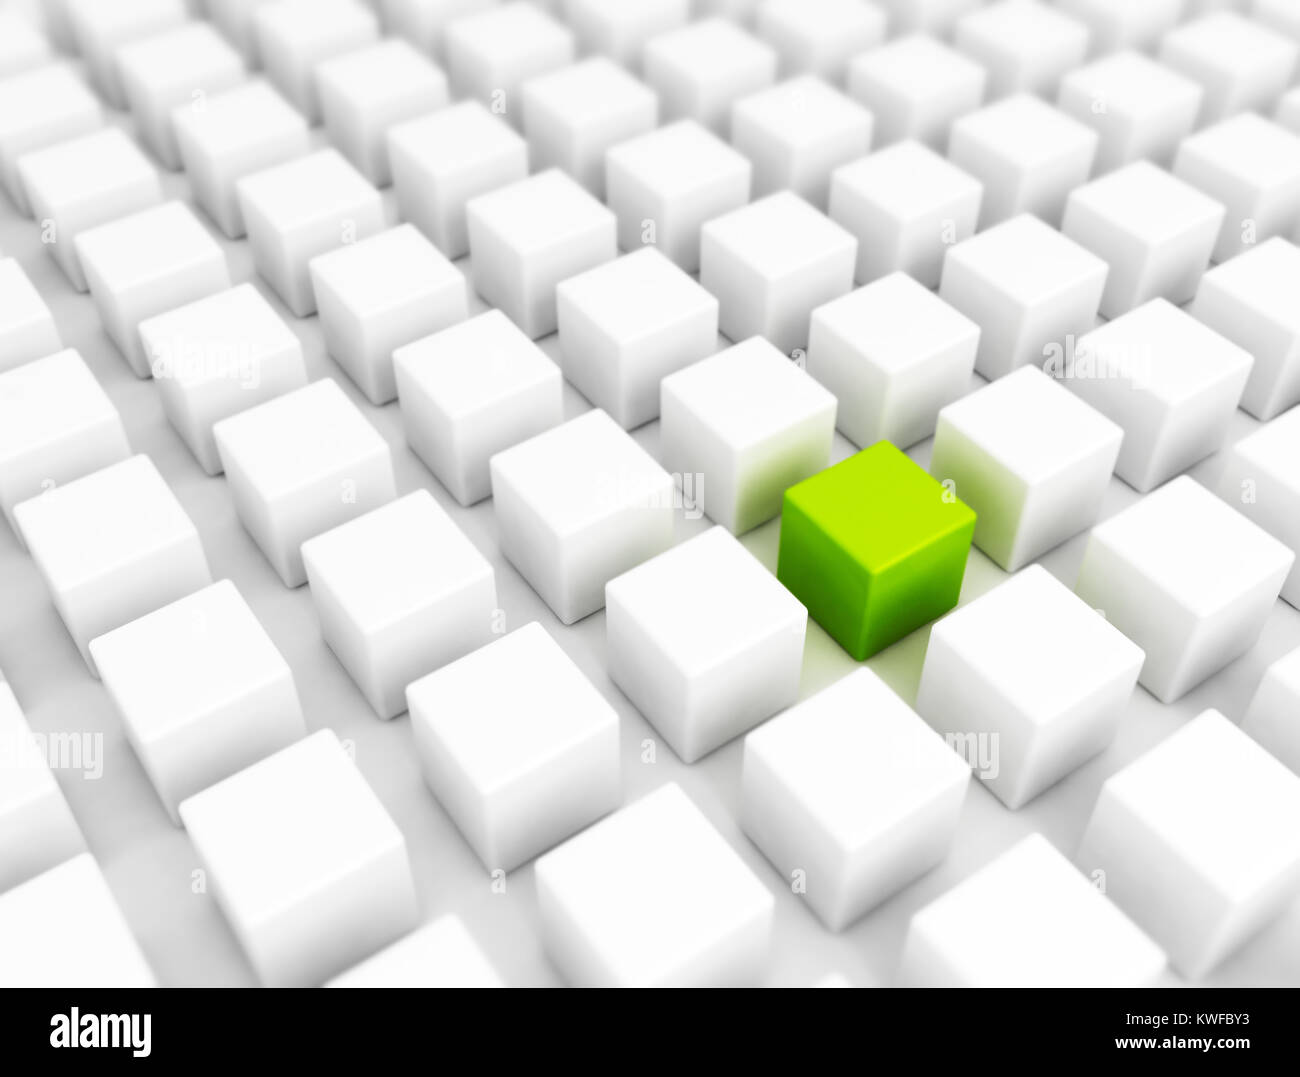 Green box standing out in a crowd Stock Photo